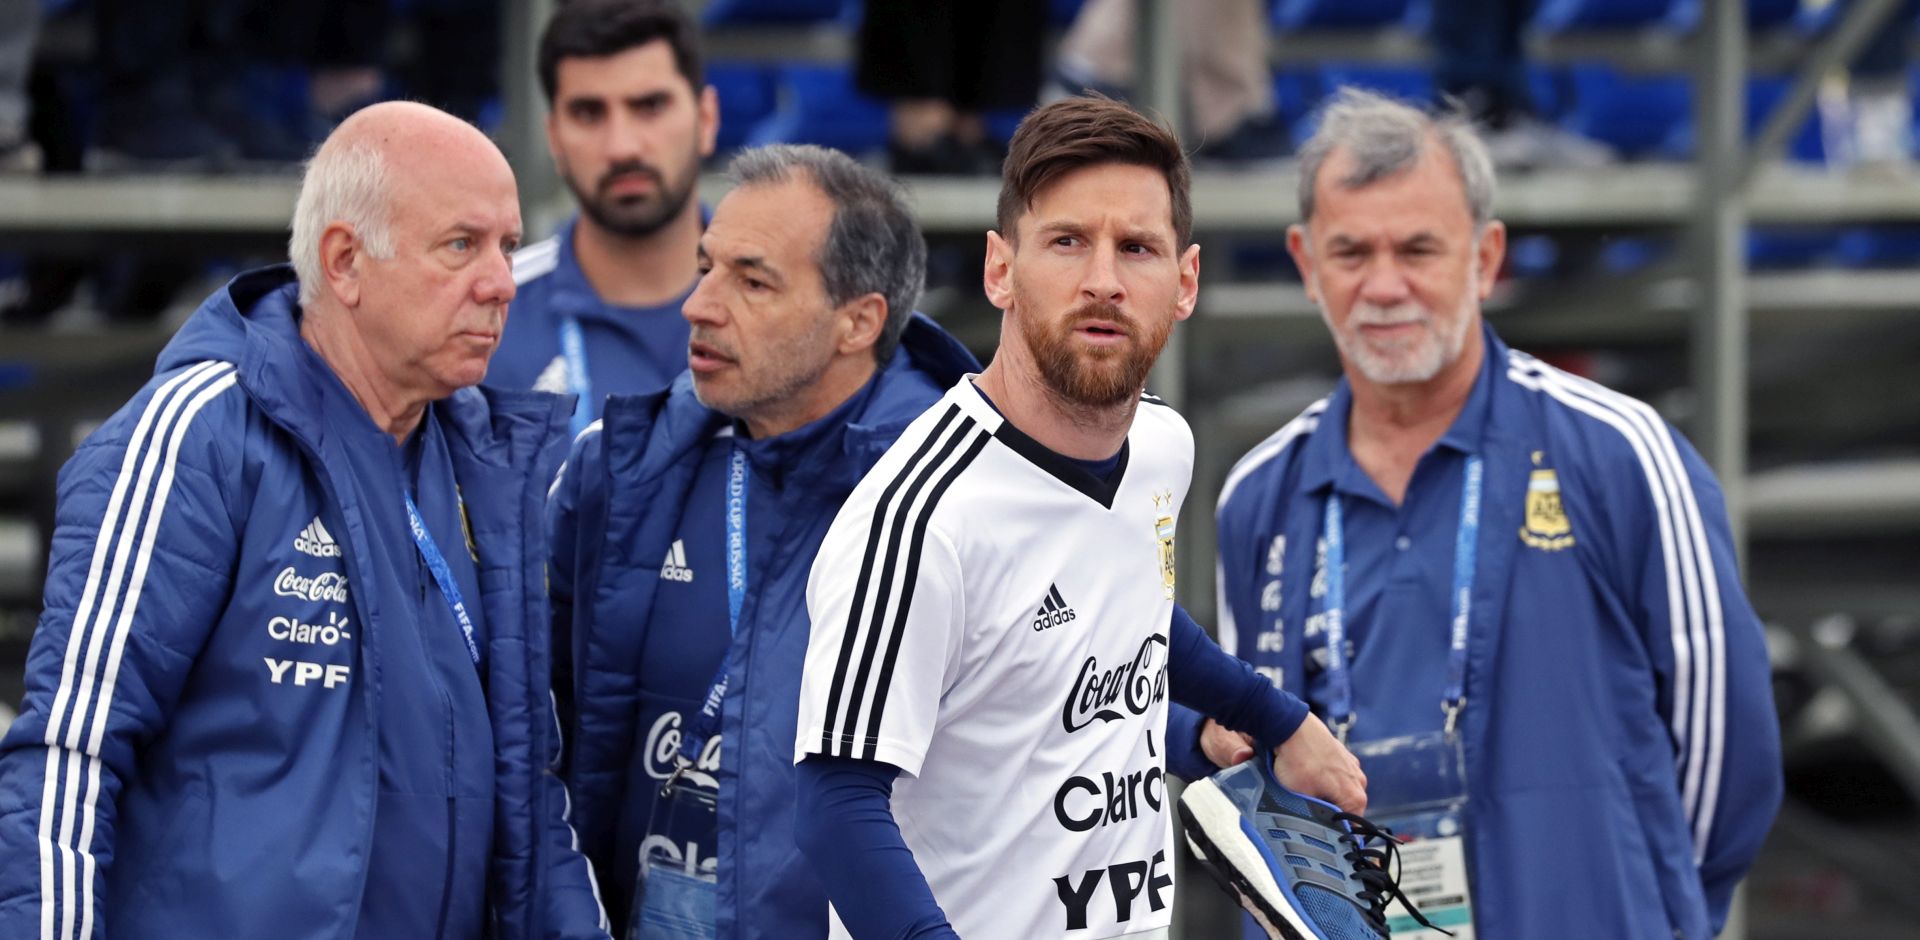 epa06800700 Lionel Messi (2-R) of Argentina after a training session in Bronnitsy, outside Moscow, Russia, 11 June 2018. Argentina's national soccer team prepares for the FIFA World Cup 2018 taking place in Russia from 14 June to 15 July 2018.  EPA/YURI KOCHETKOV